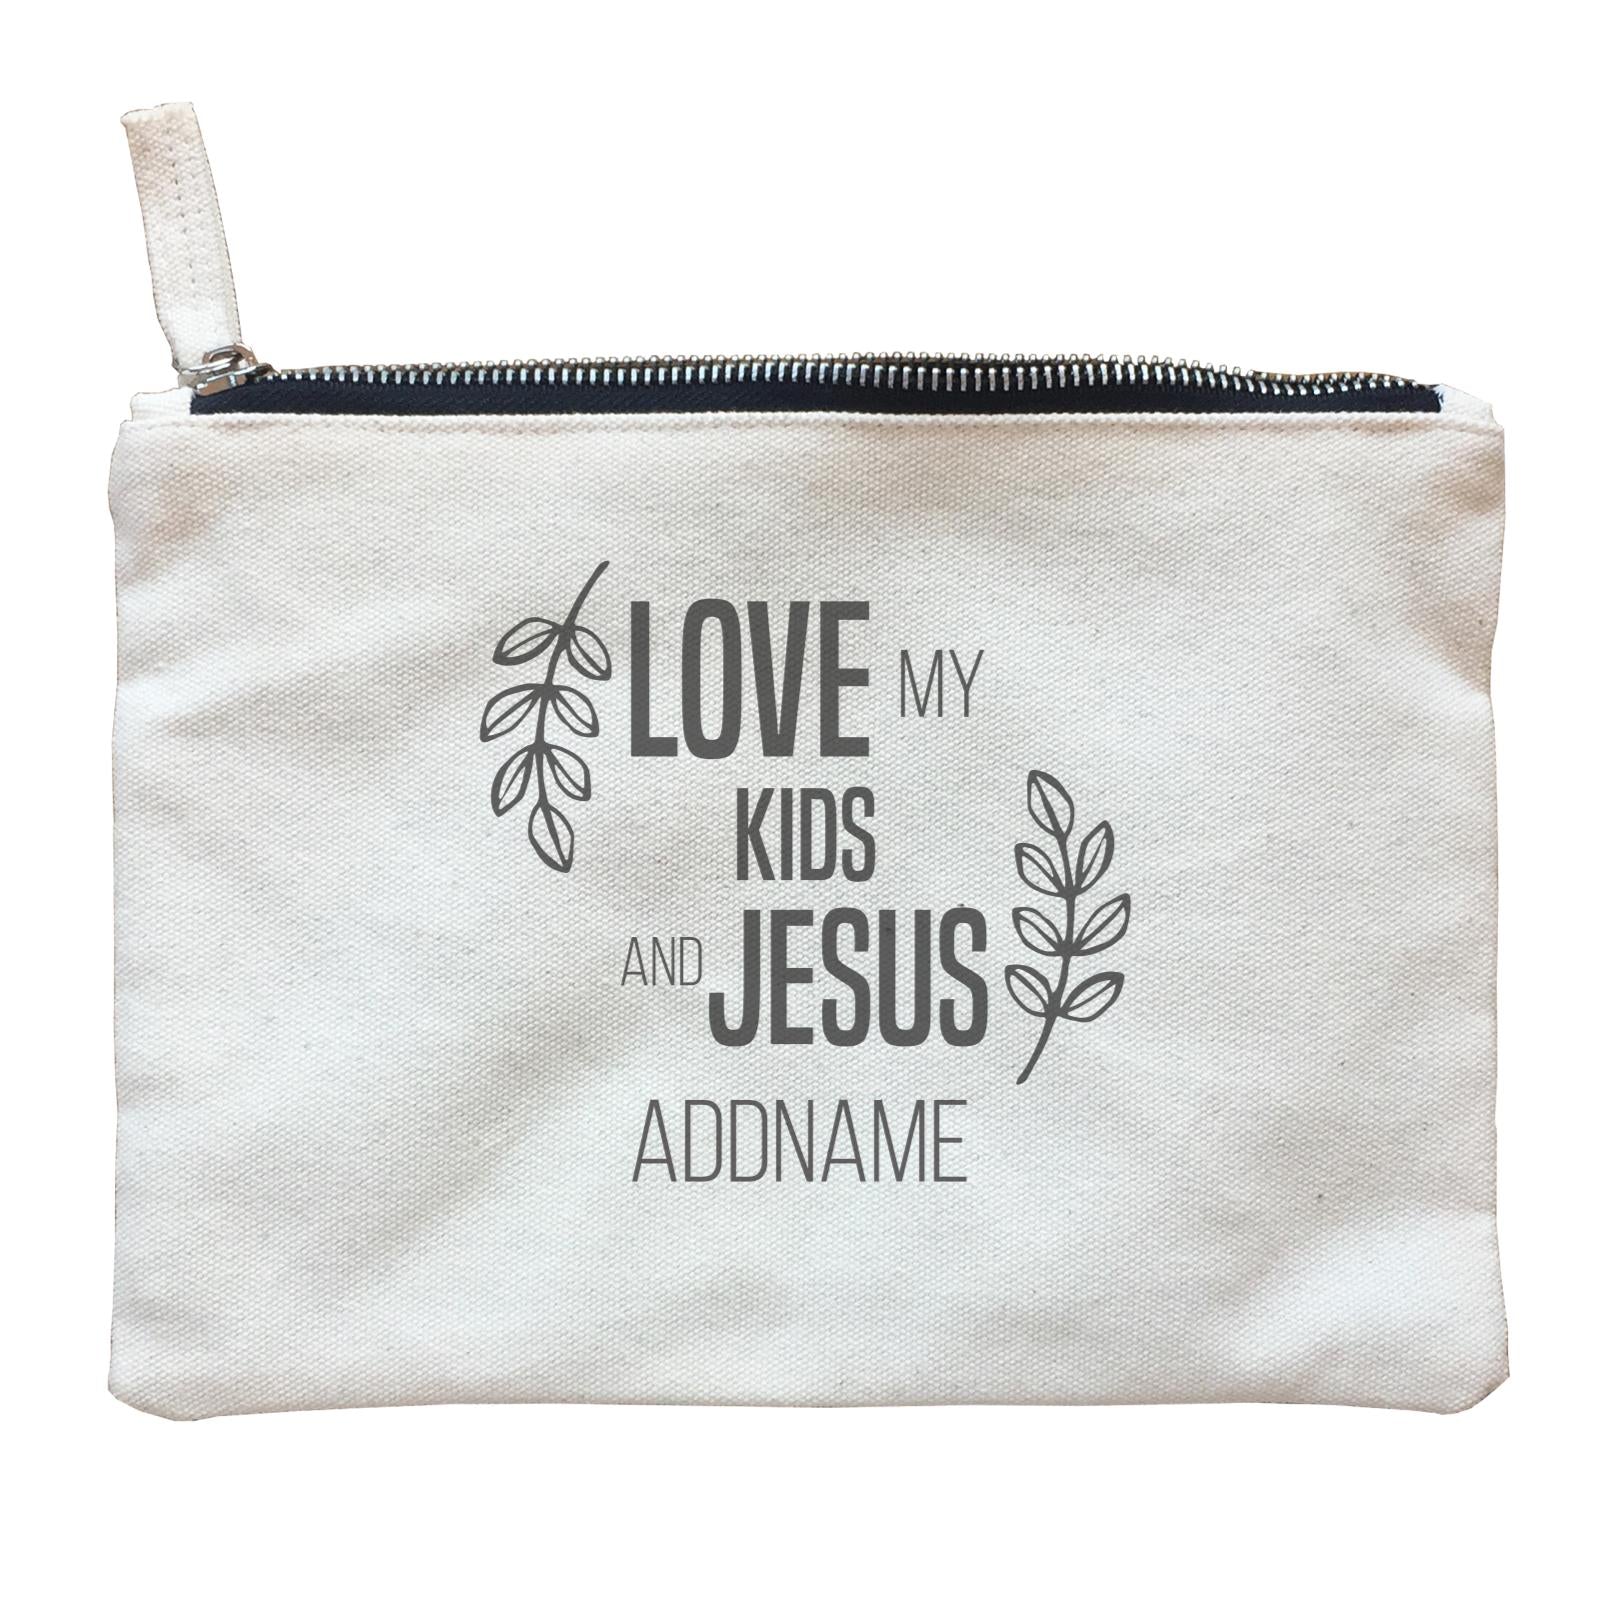 Christian Series Love My Kids And Jesus Addname Zipper Pouch